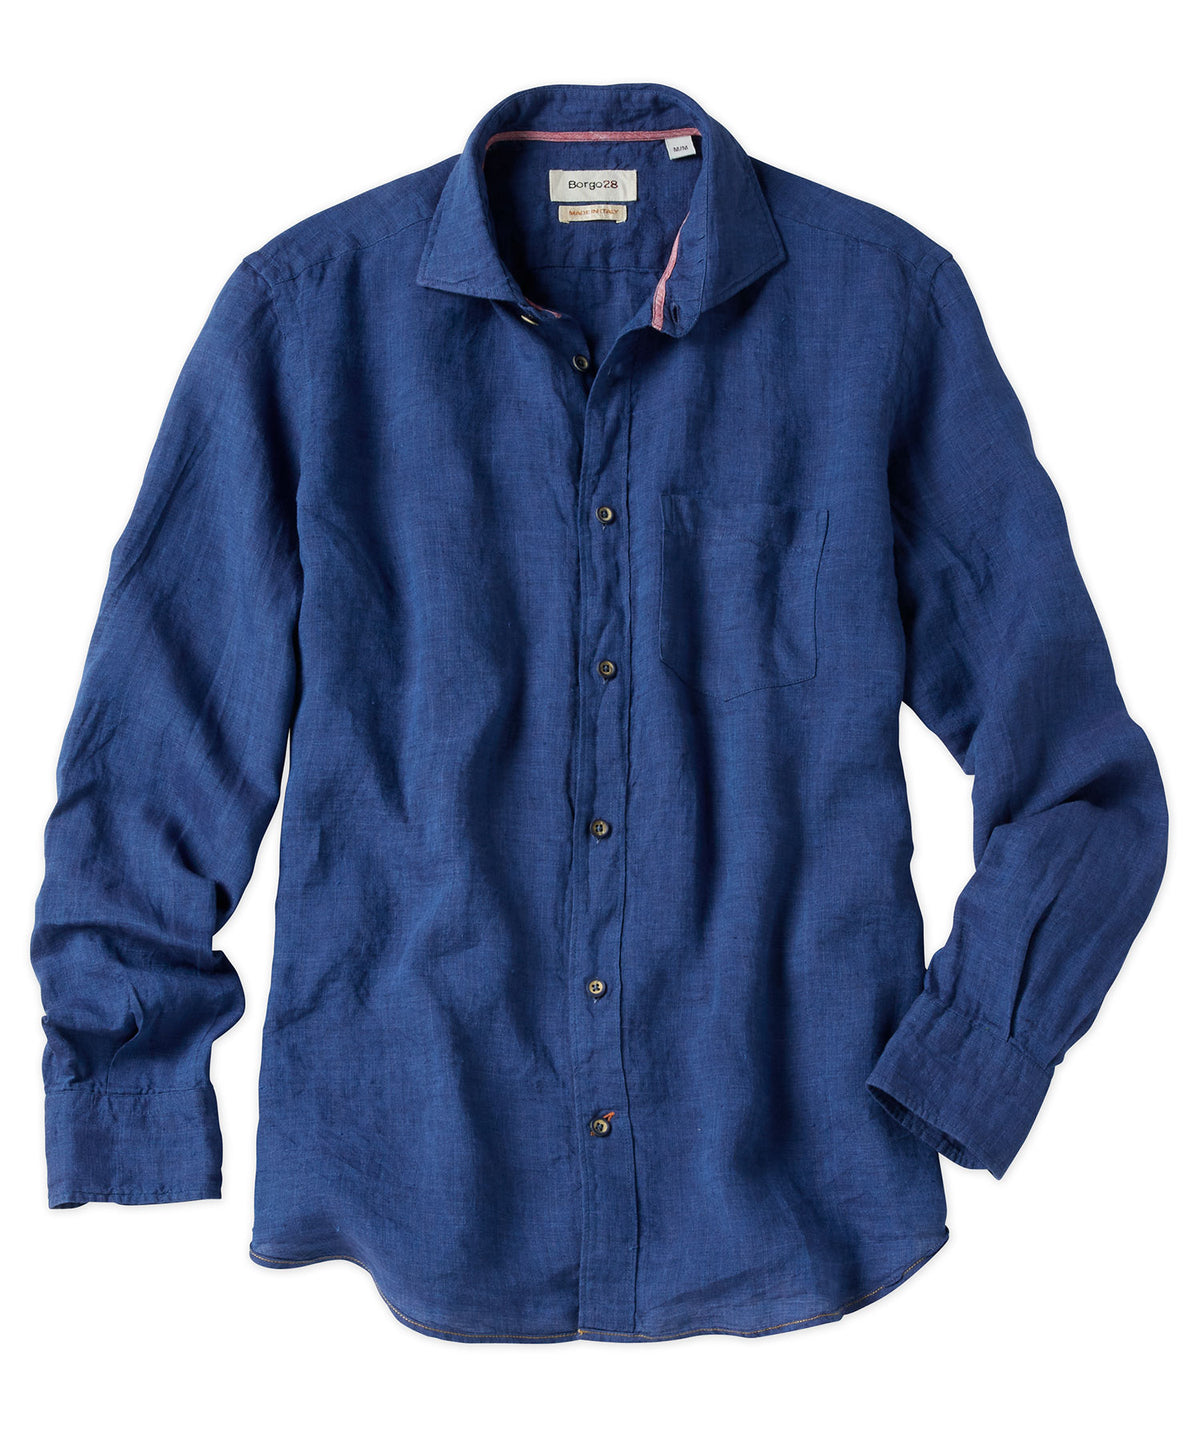 Garment Dyed Soft Washed Long Sleeve Linen Shirt